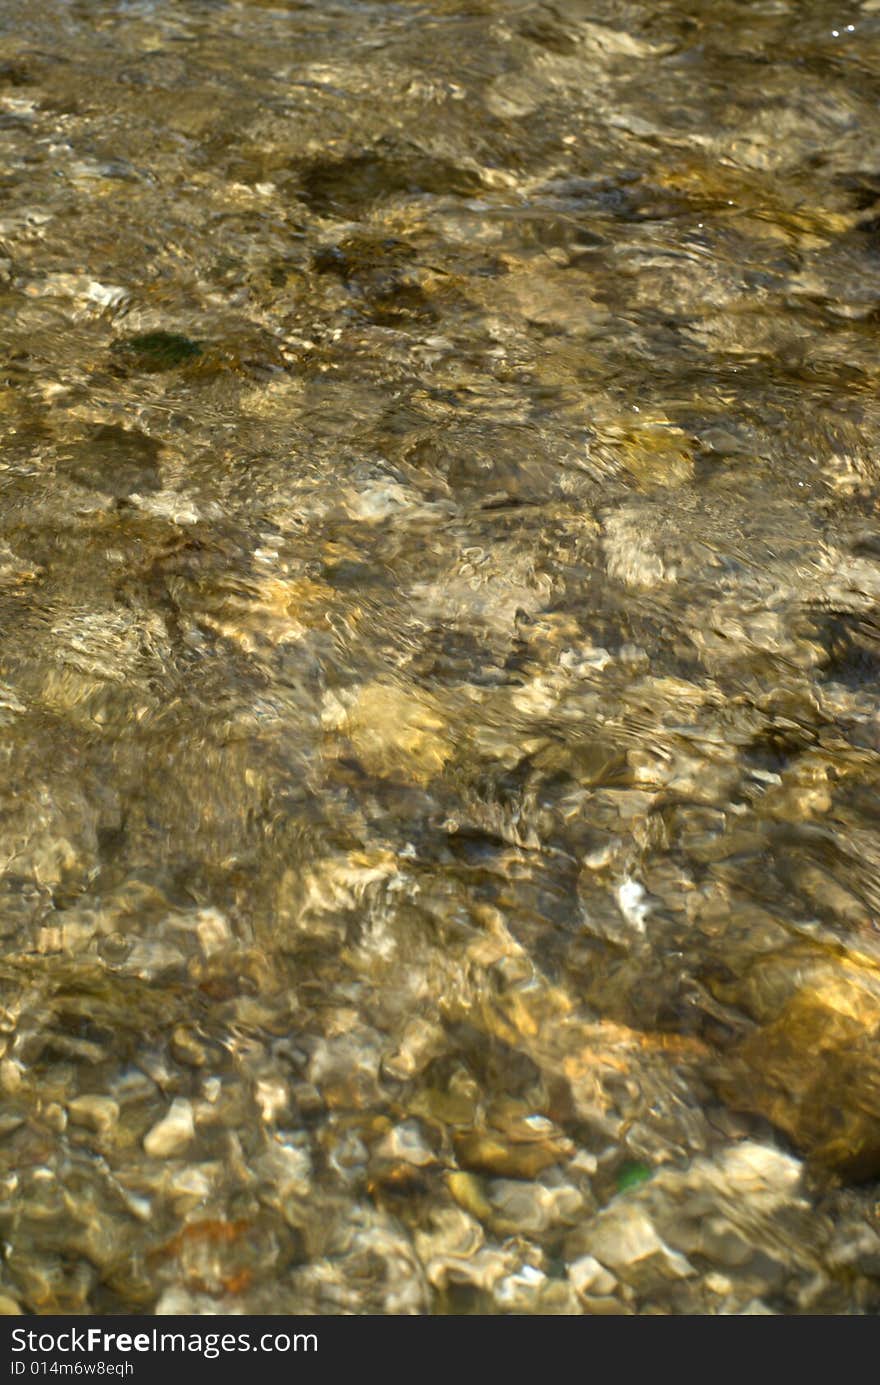 Background made from stones under water